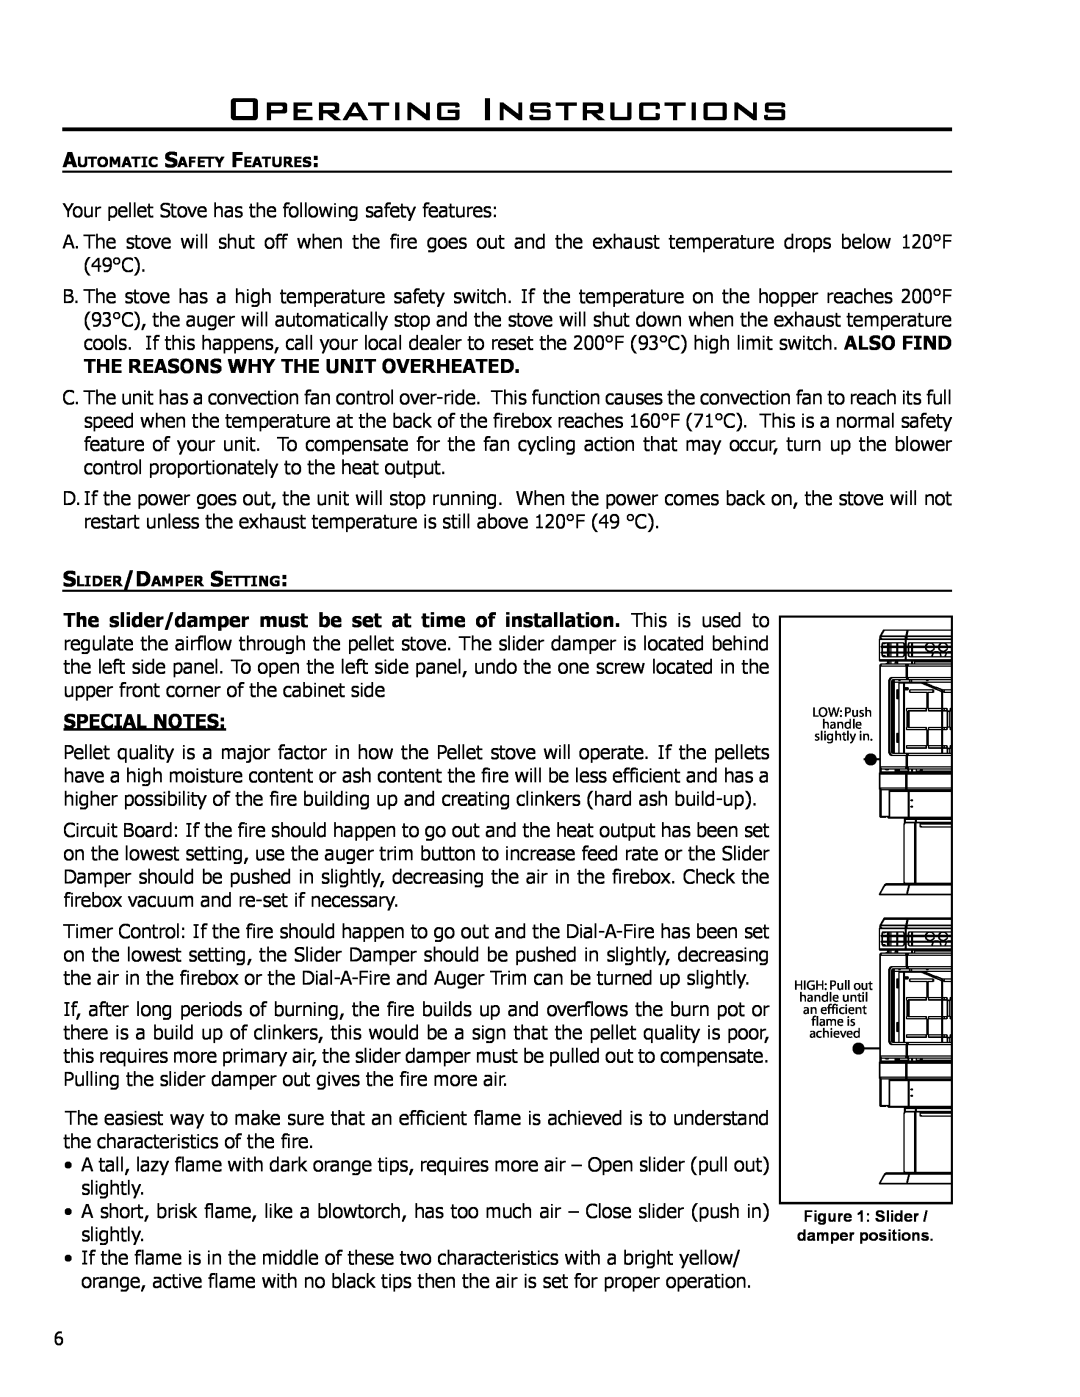 Enviro EF3 owner manual Operating Instructions, The Reasons Why The Unit Overheated, Special Notes 